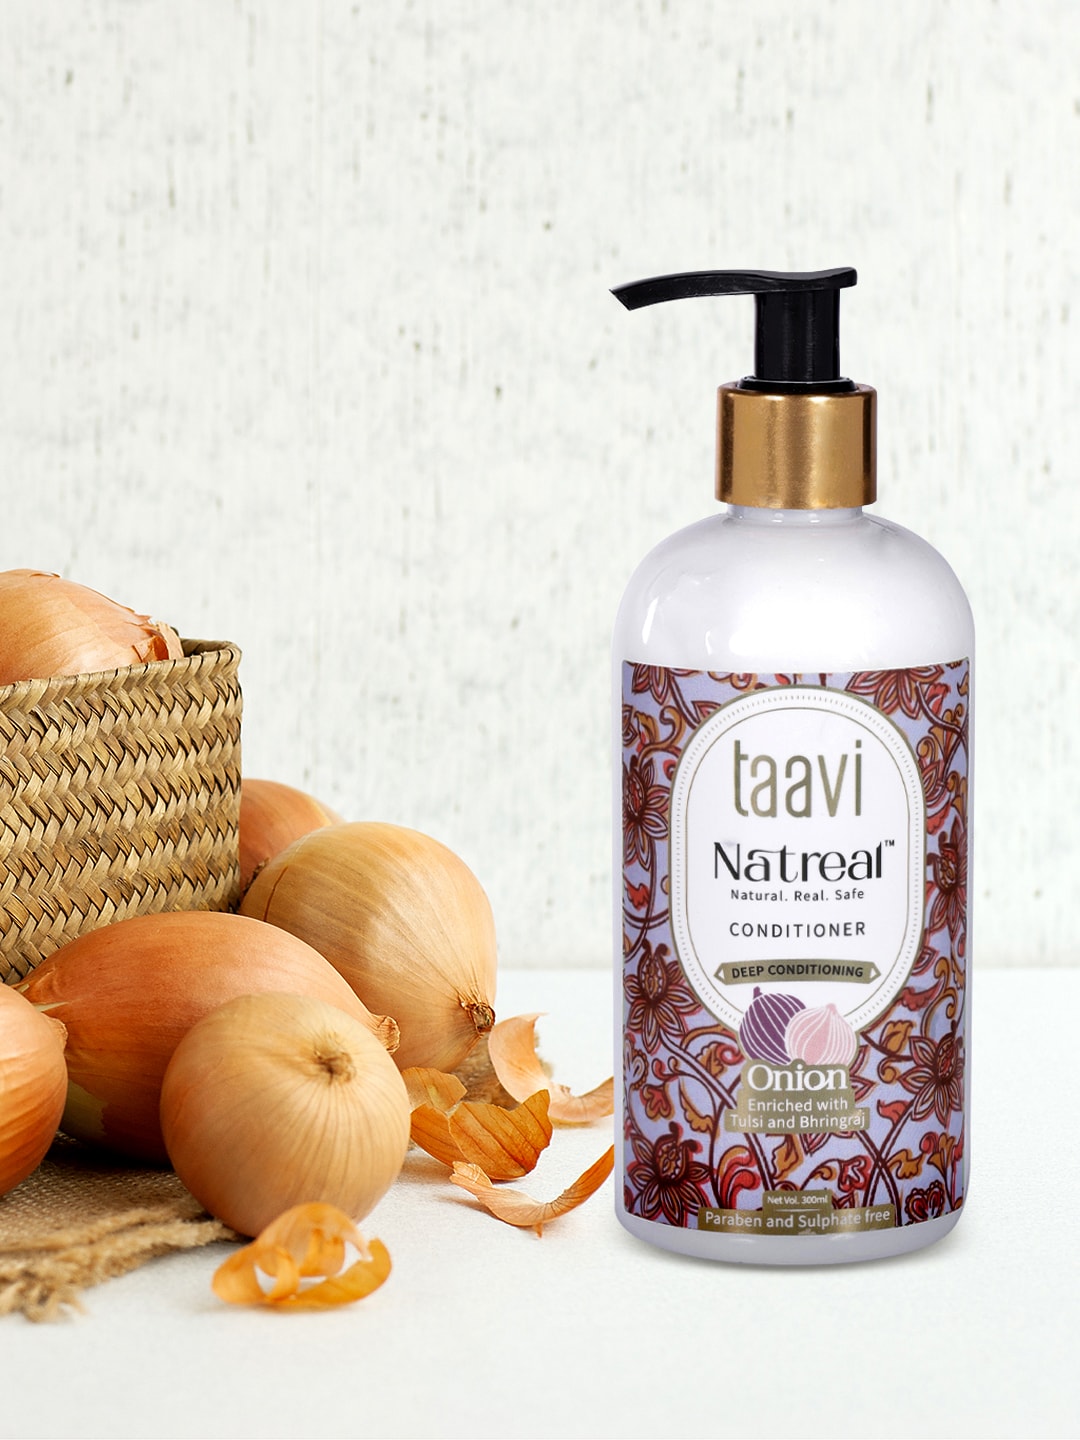 Taavi Natreal Deep Conditioning Onion Conditioner 300 ml Price in India